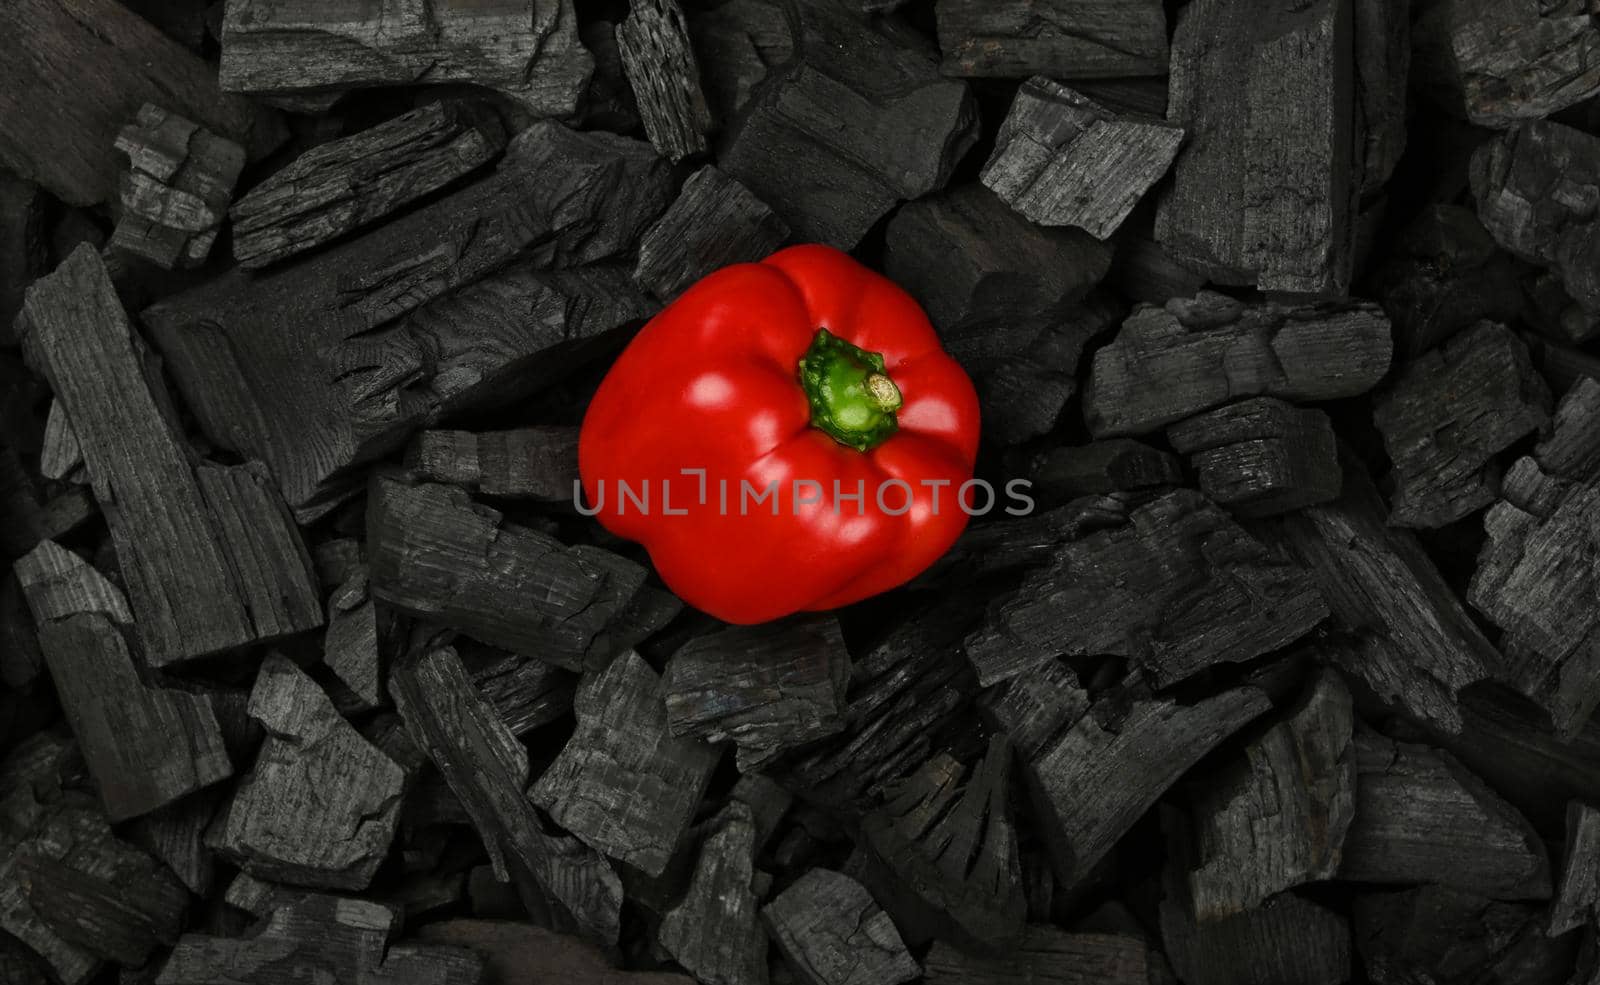 Cooking red bell pepper on charcoal grill by BreakingTheWalls